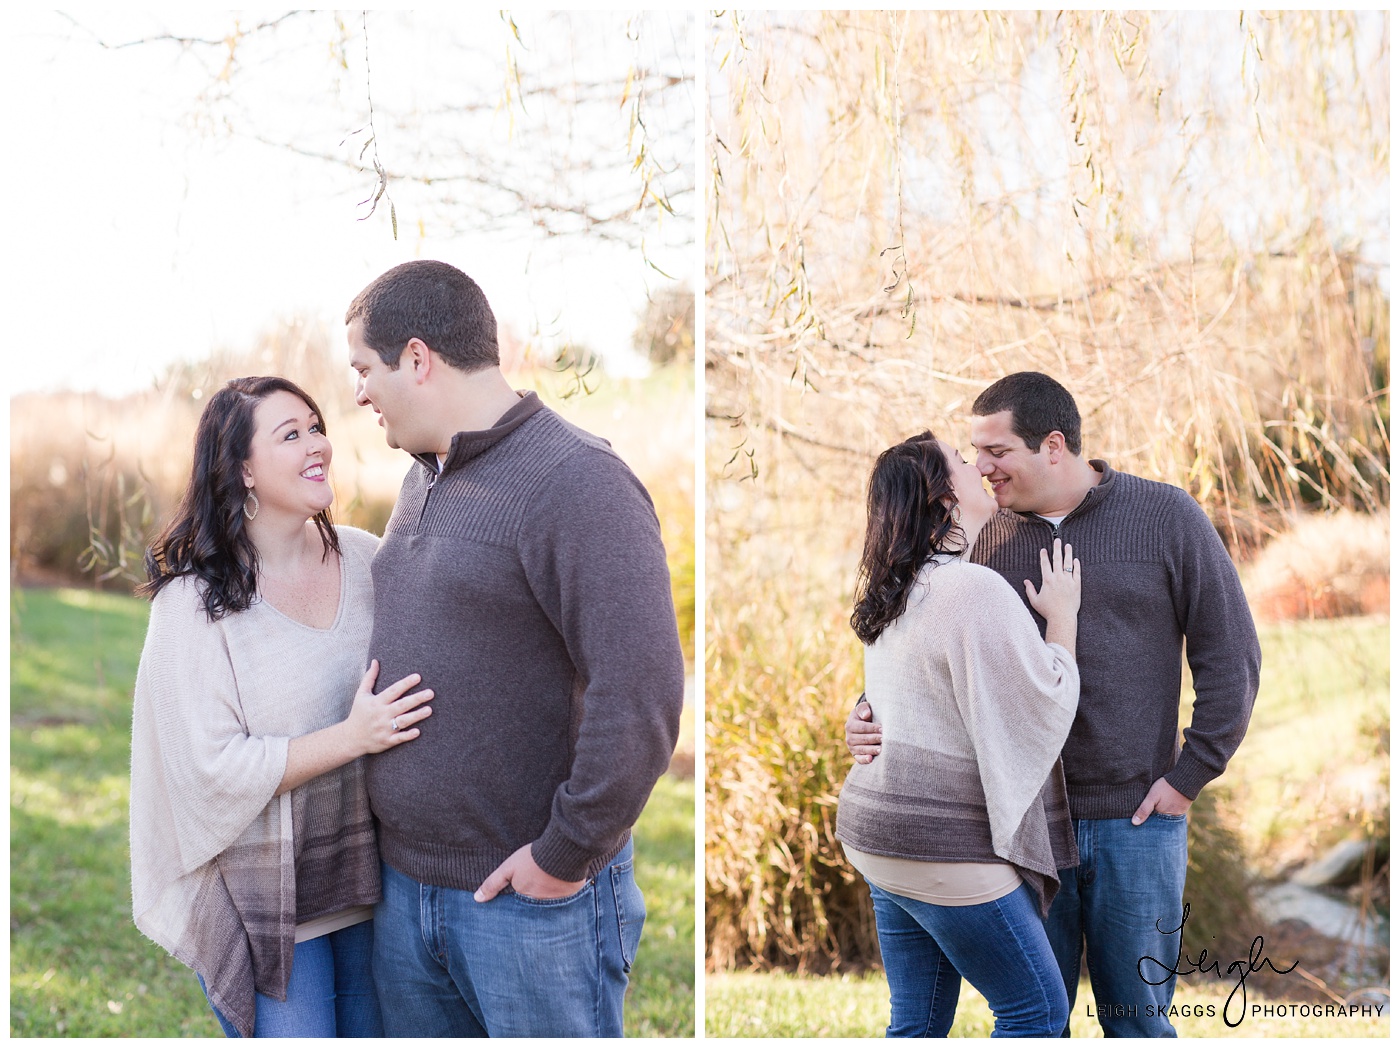 Brittney & Tim | Colonial Heritage Williamsburg Engagement session